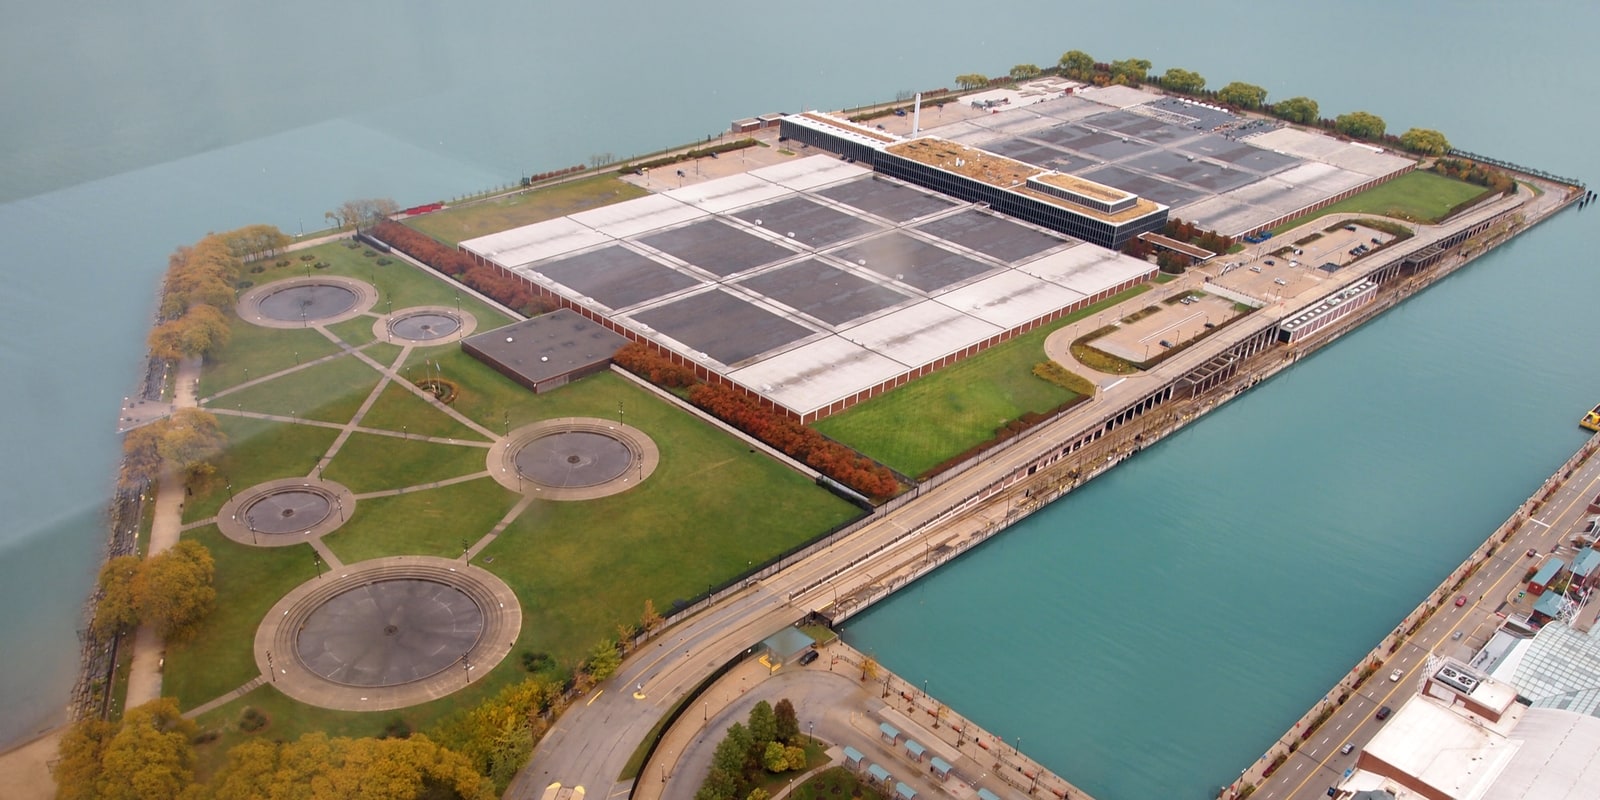 Figure 8: Arial view of James W. Jardine water purification plant in Chicago